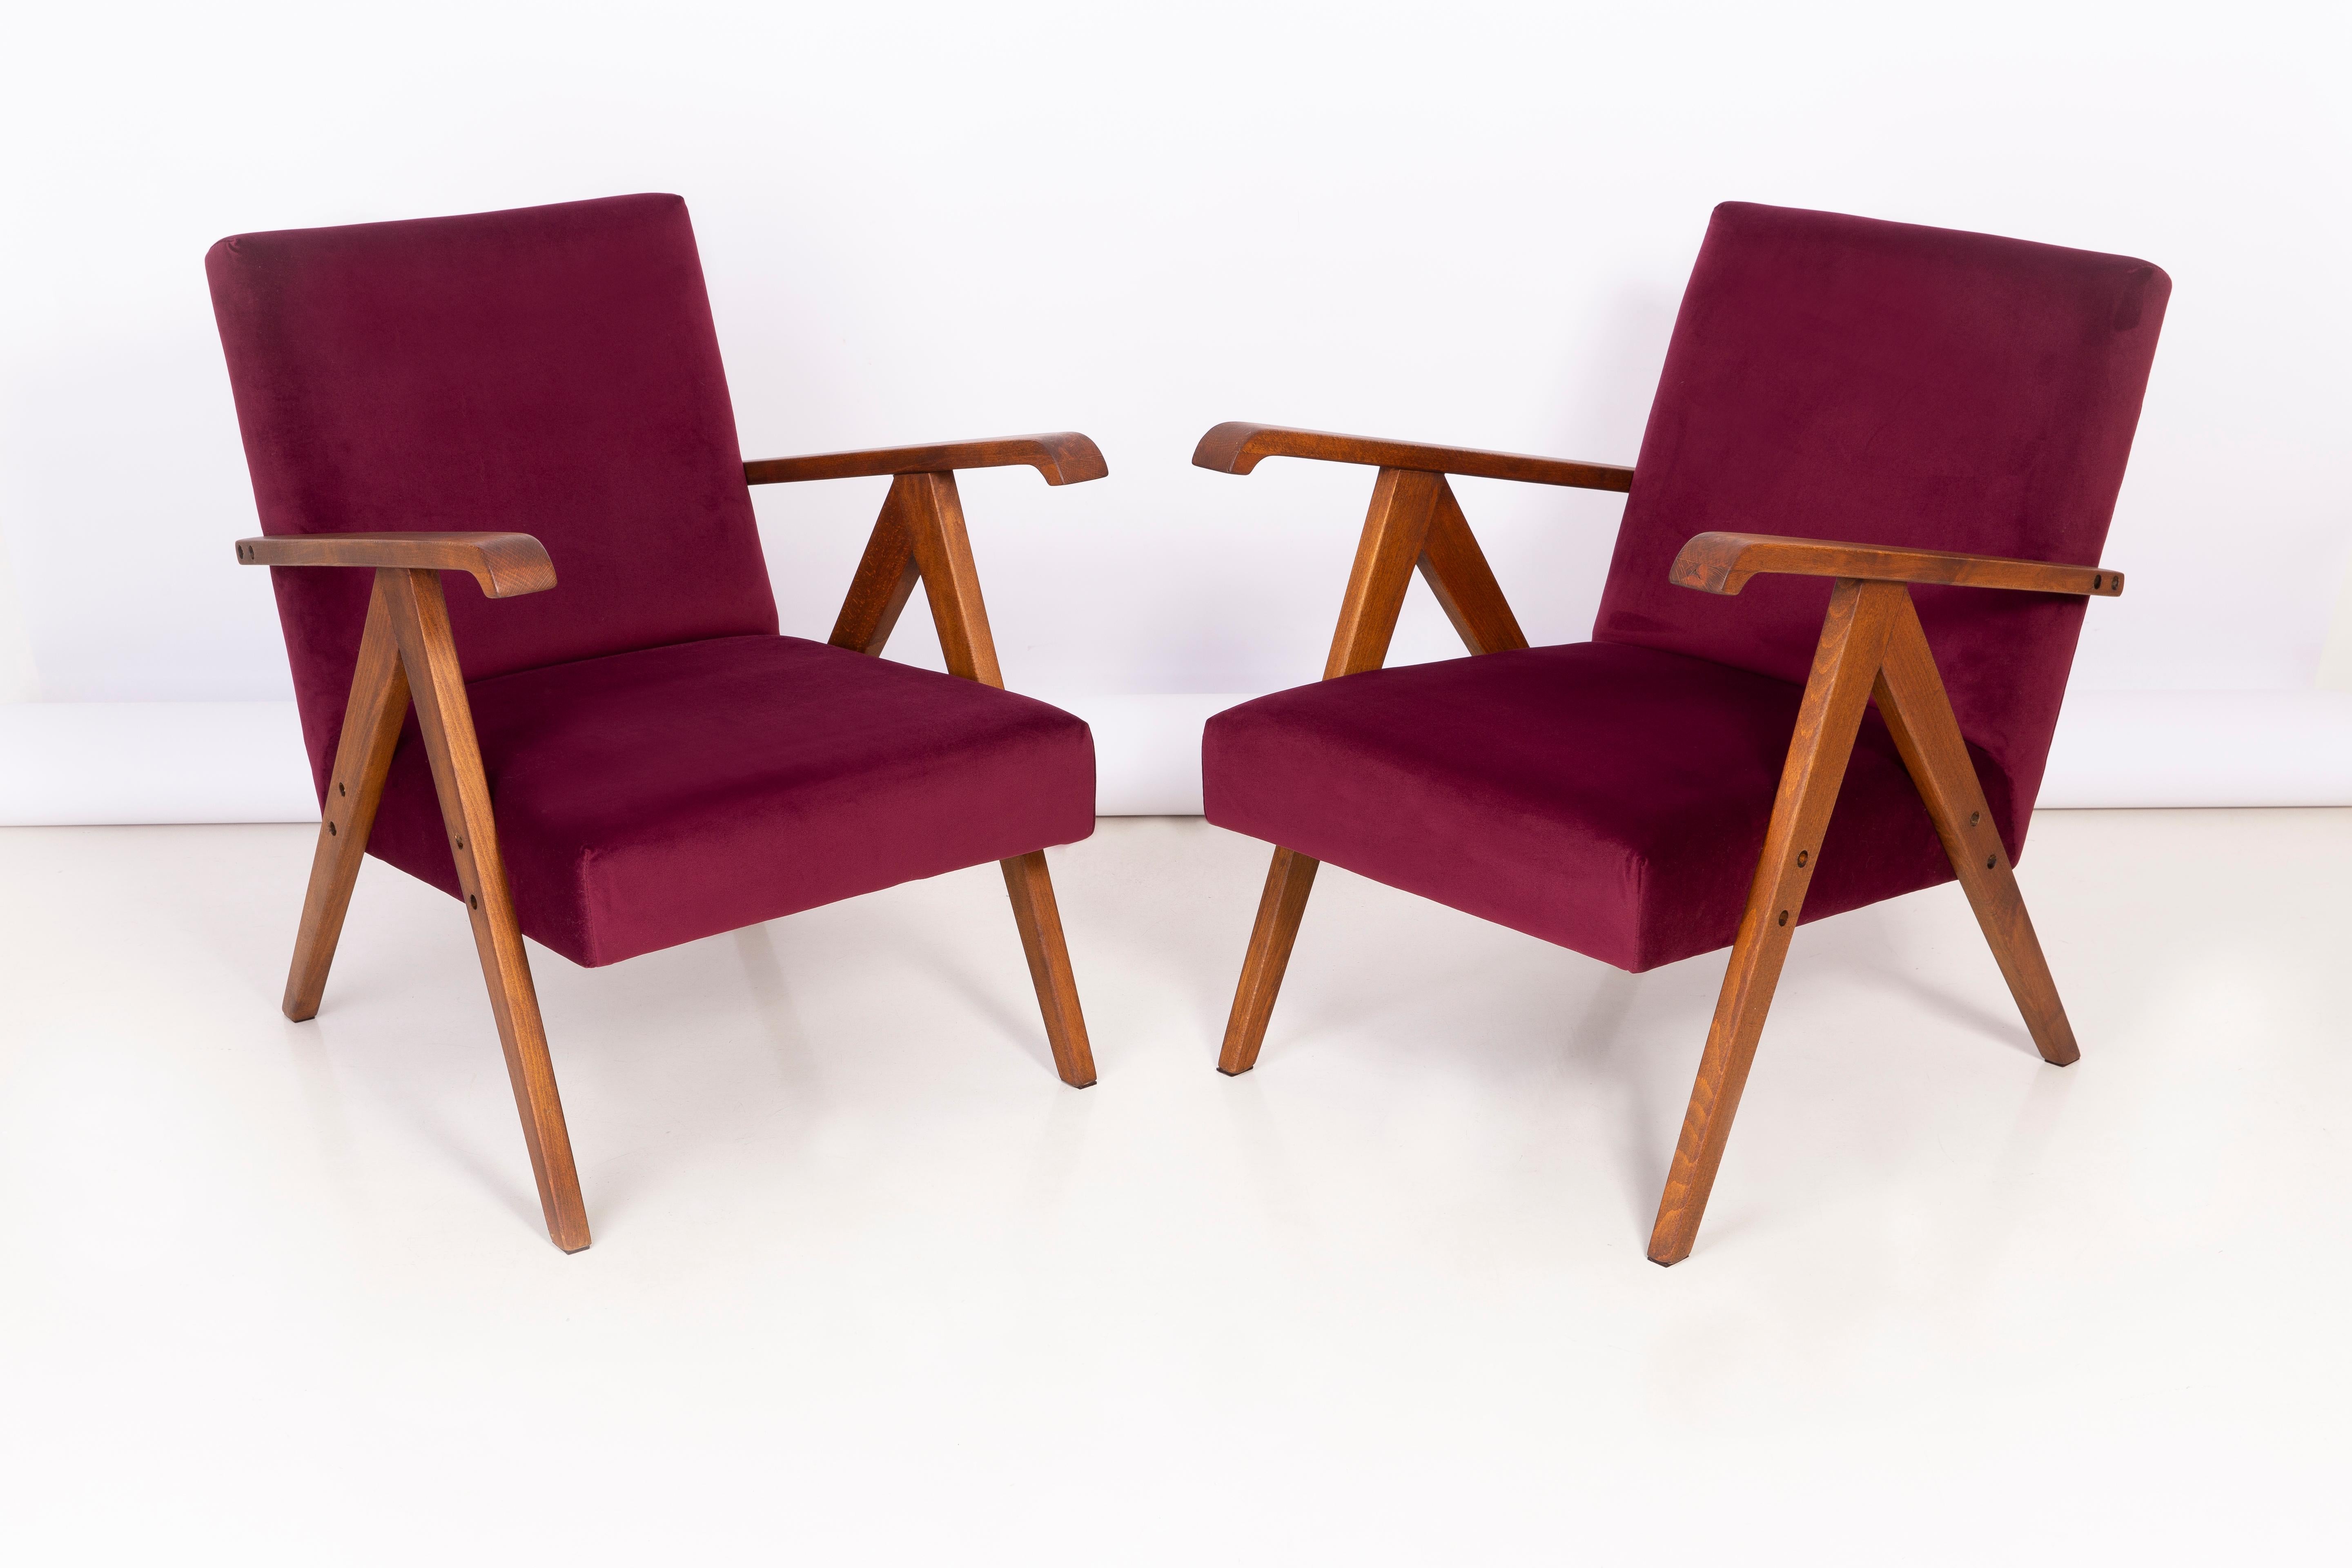 A beautiful, restored armchairs designed by Henryk Lis. Furniture after full carpentry and upholstery renovation. The fabric, which is covered with a backrest and a seat, is a high-quality burgundy velvet upholstery (color 2932). The armchairs will